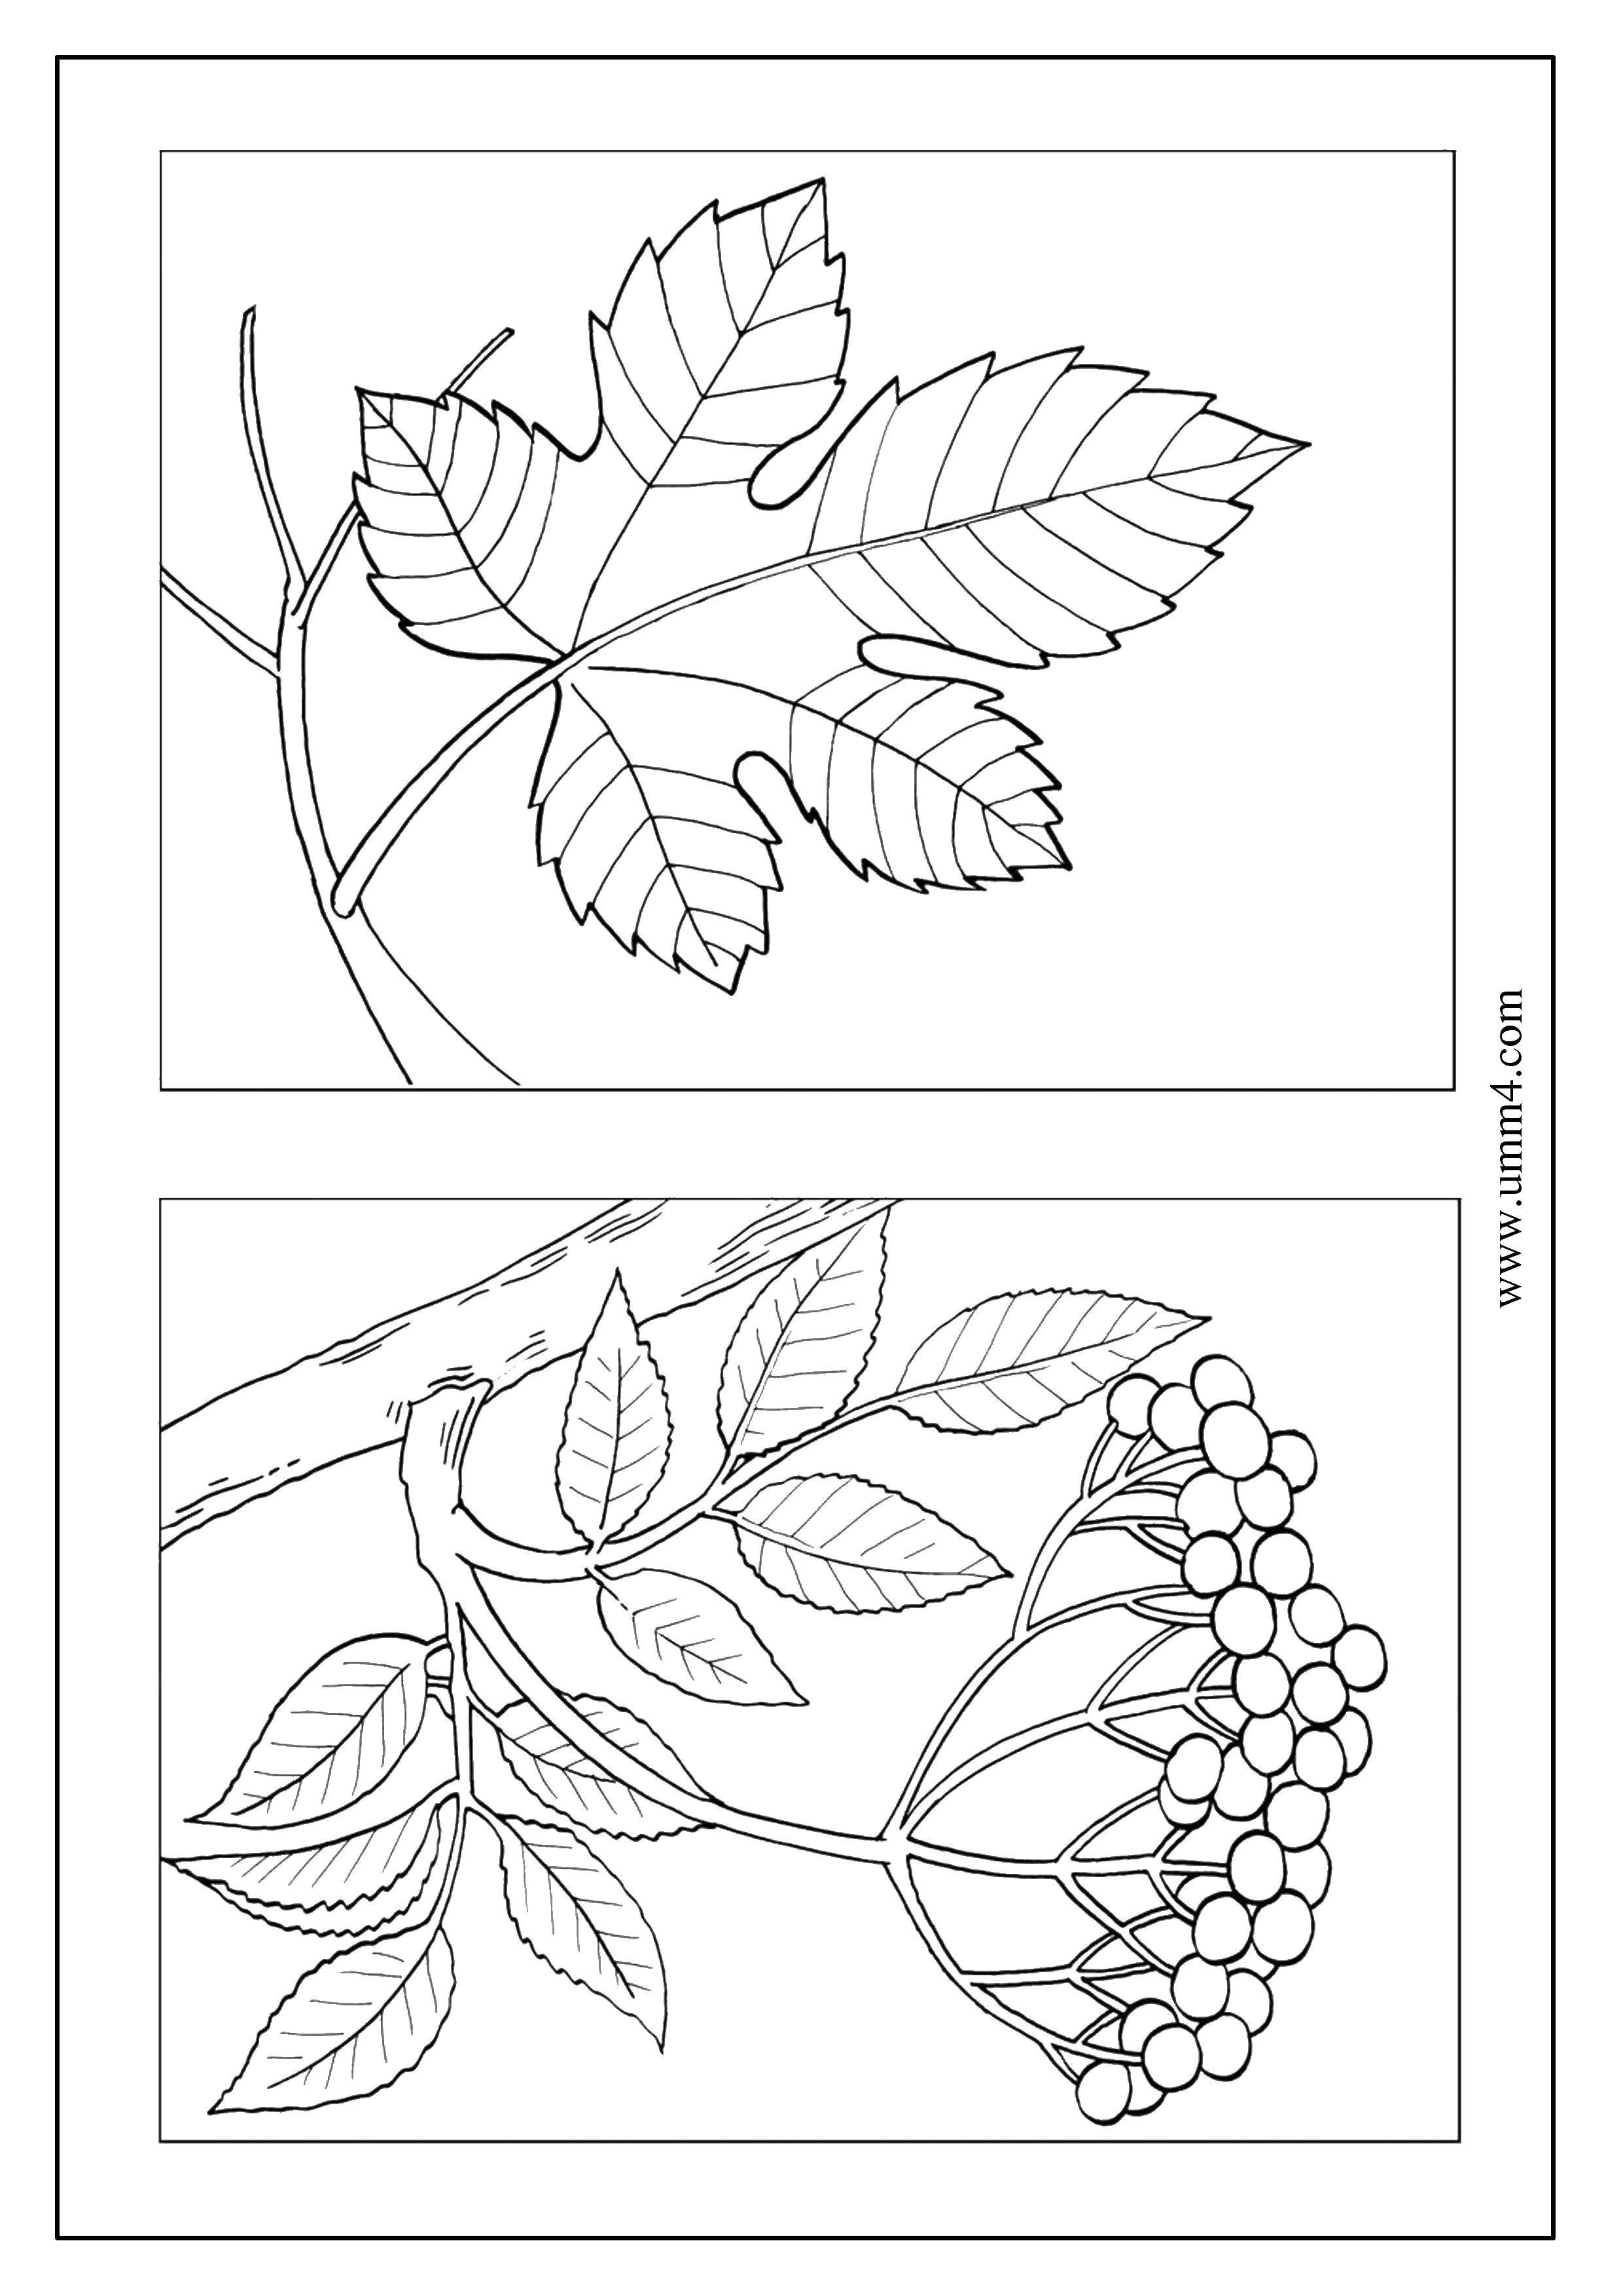 Coloring Two different kinds of leaves. Category leaves. Tags:  nature, leaves.